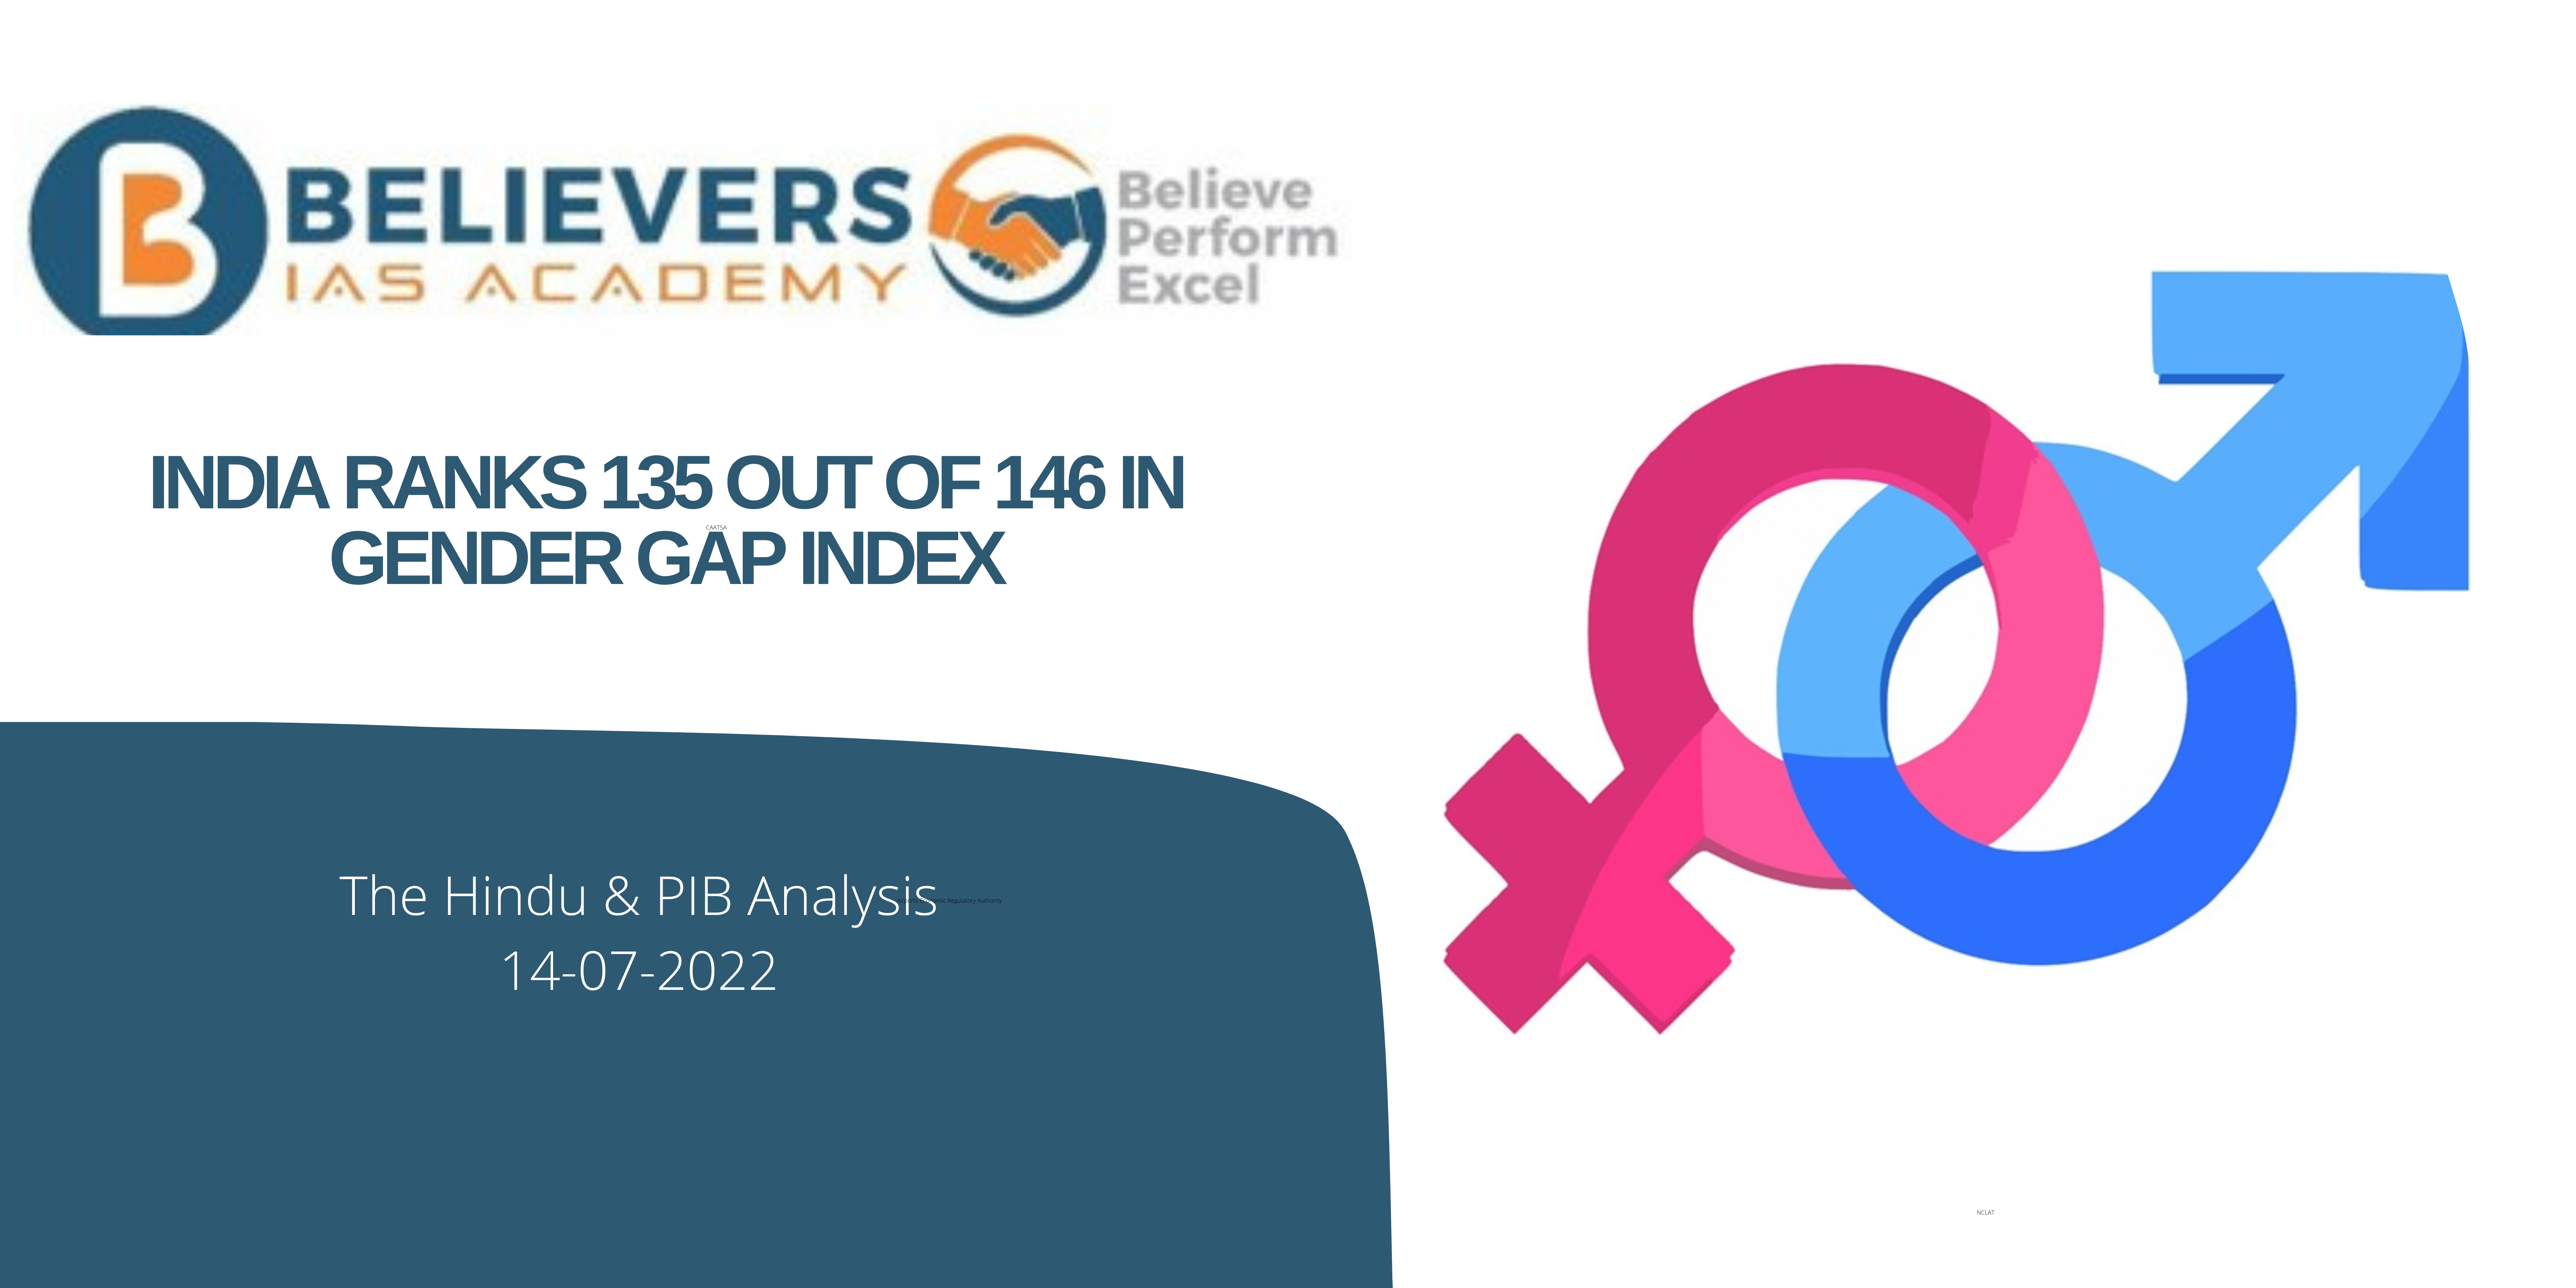 IAS Current affairs - India ranks 135 out of 146 in Gender Gap Index